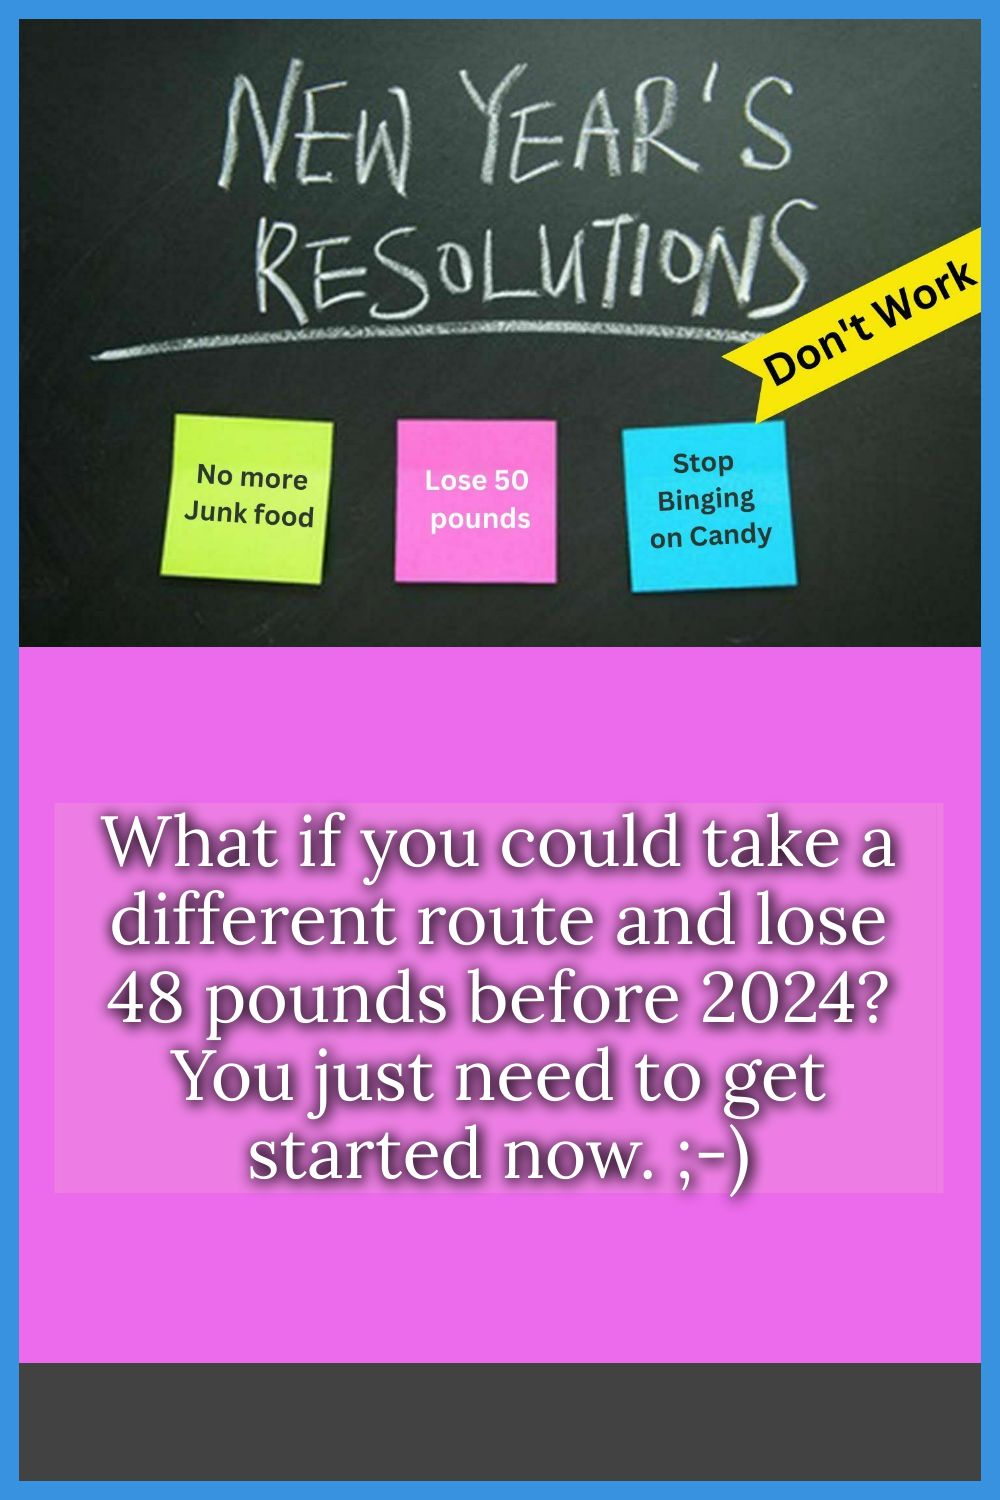 Proof New Year\'s Resolutions to Lose Weight Don\'t Work